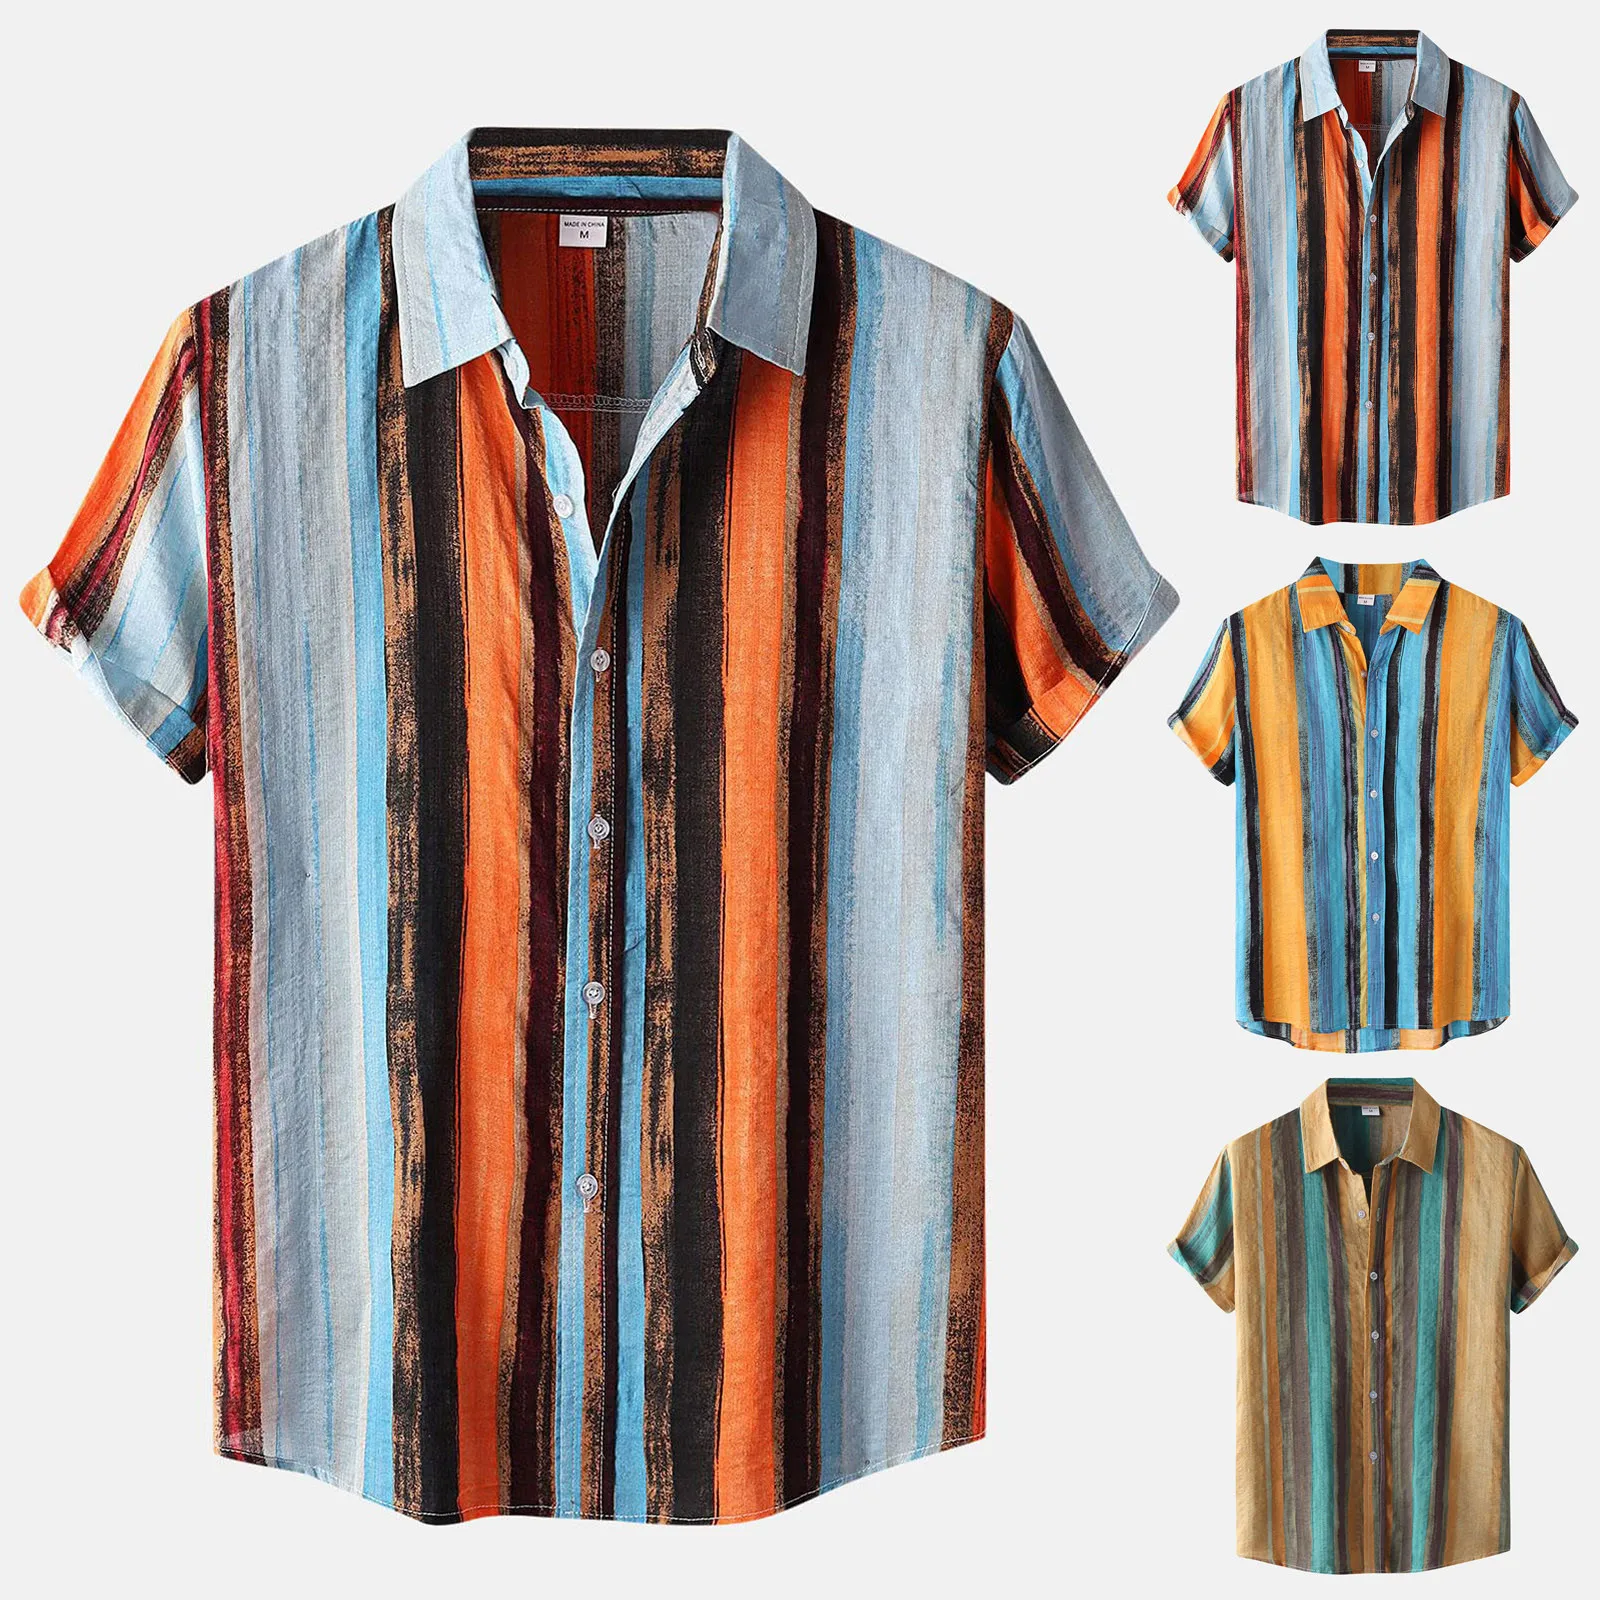 

Men's Summer Vacation Contrast Color Striped Printed Short Sleeve Shirt Casual Lapel Button Down Blouse Tops Chemise Homme#g3